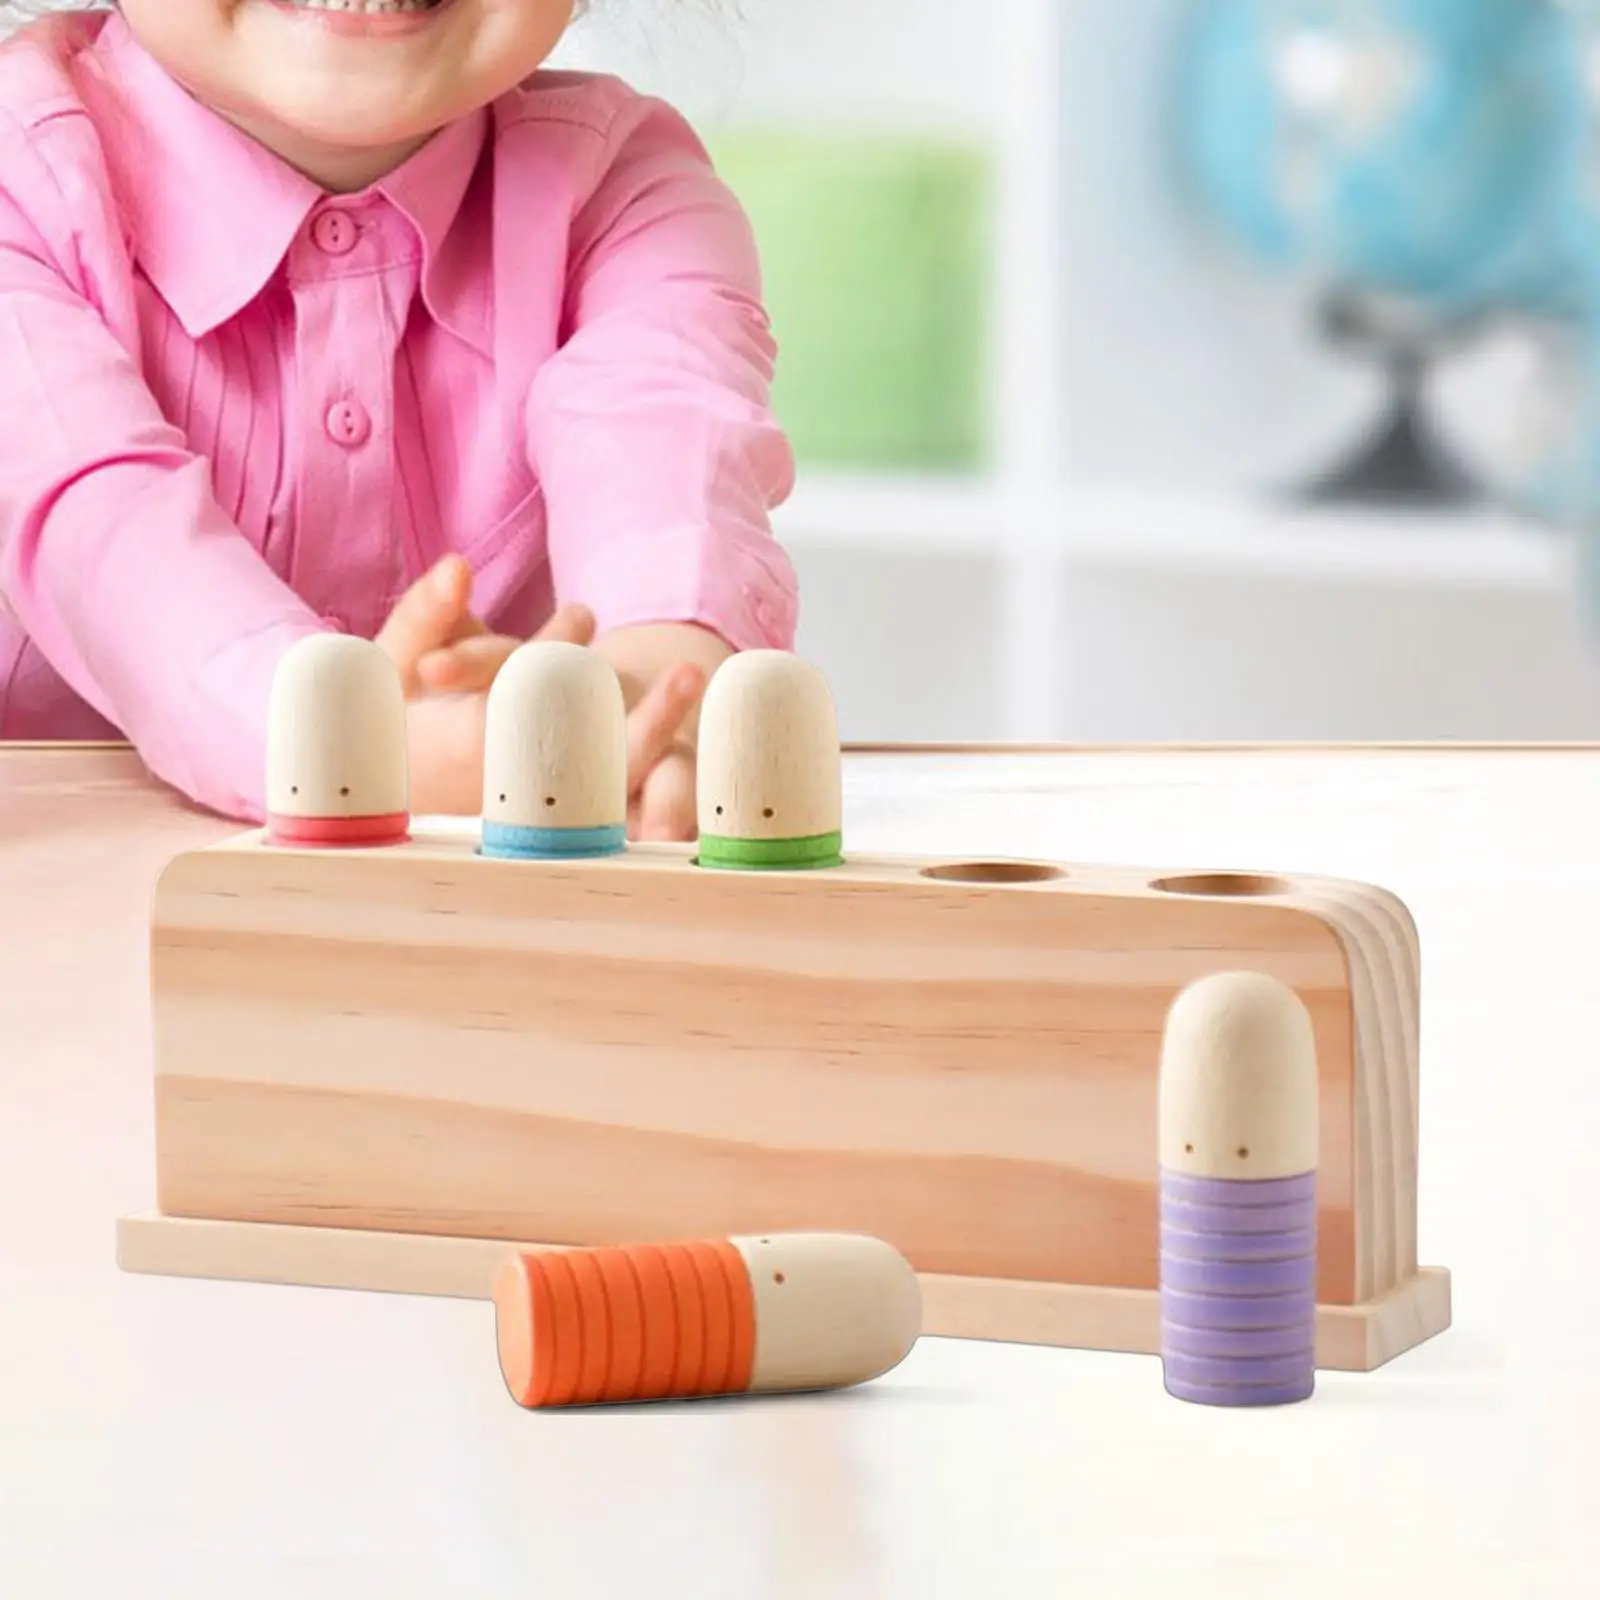 Wooden Peg People Wood Figures Shape Preschool Learning Educational Toys Montessori Toys for Toddlers